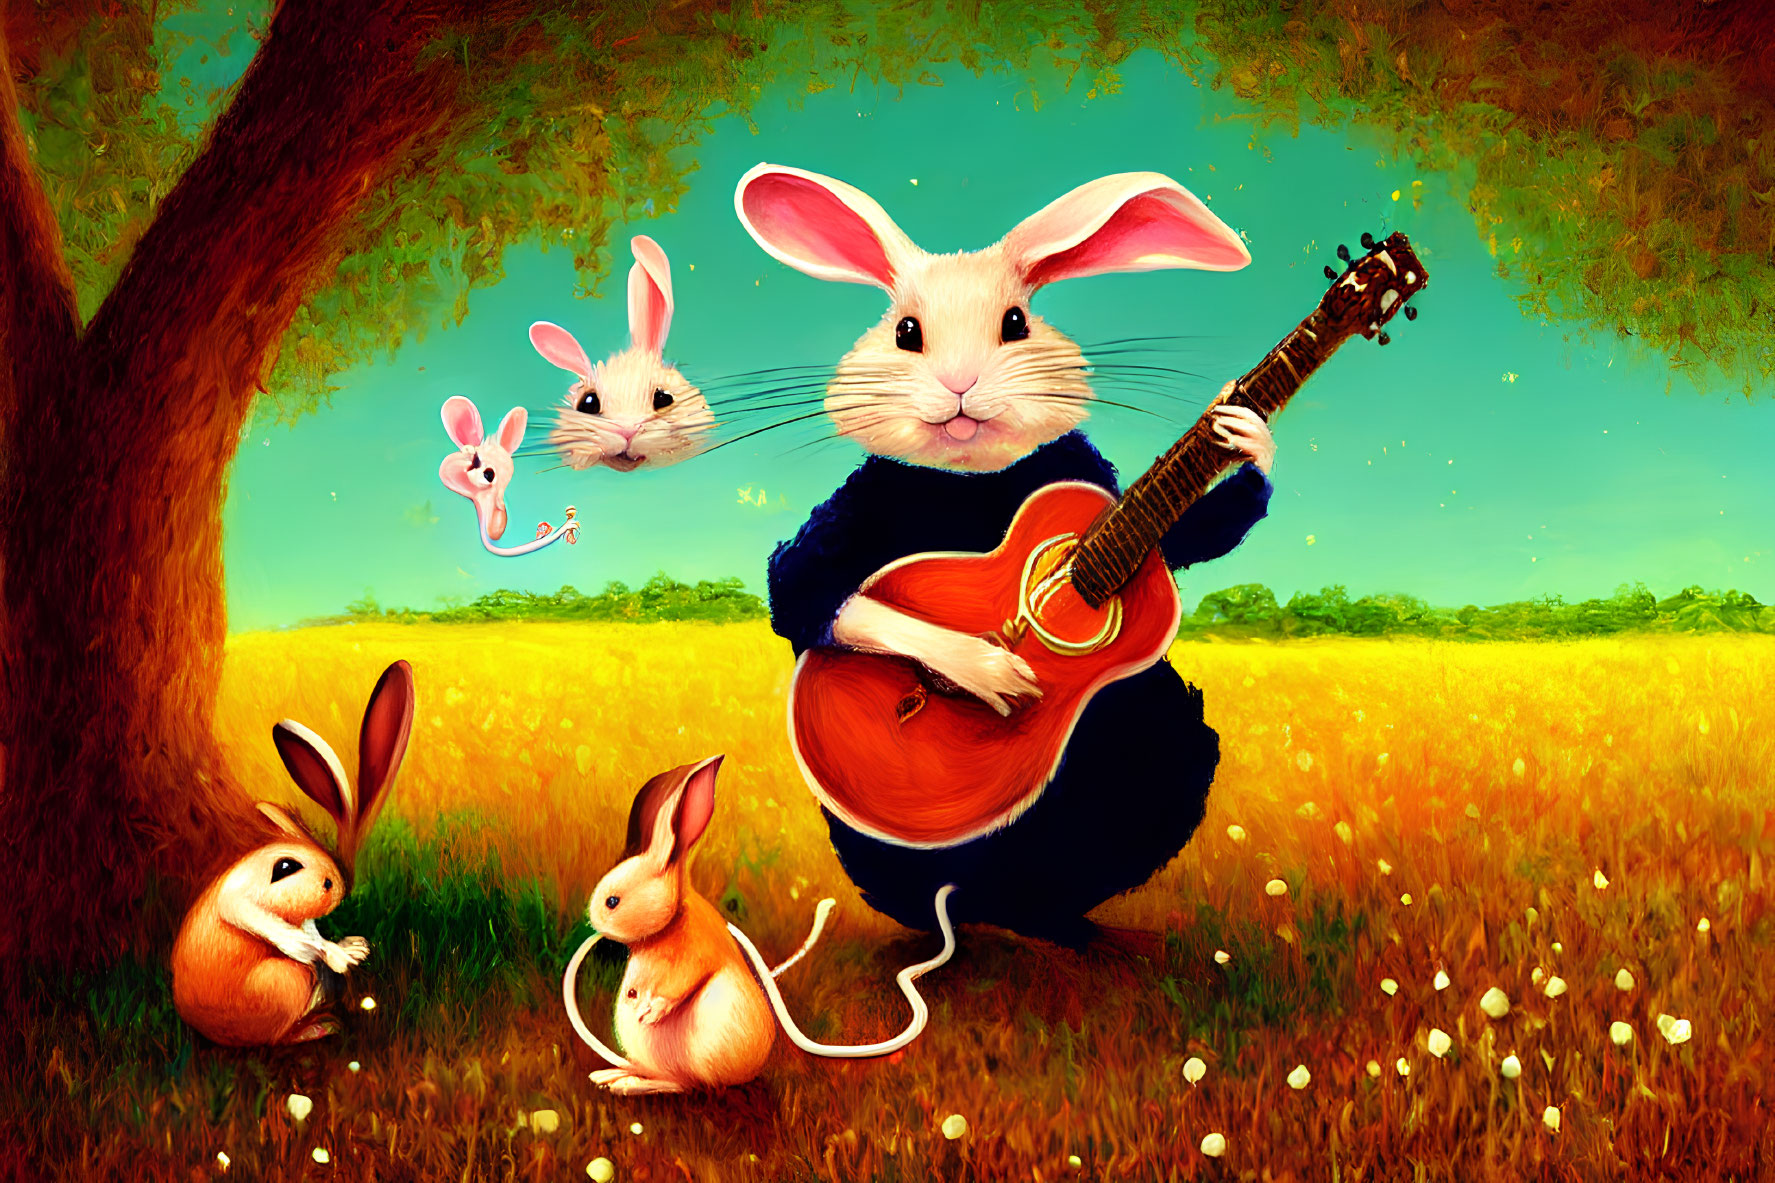 Four Cartoon Rabbits Playing Guitar in Sunny Meadow